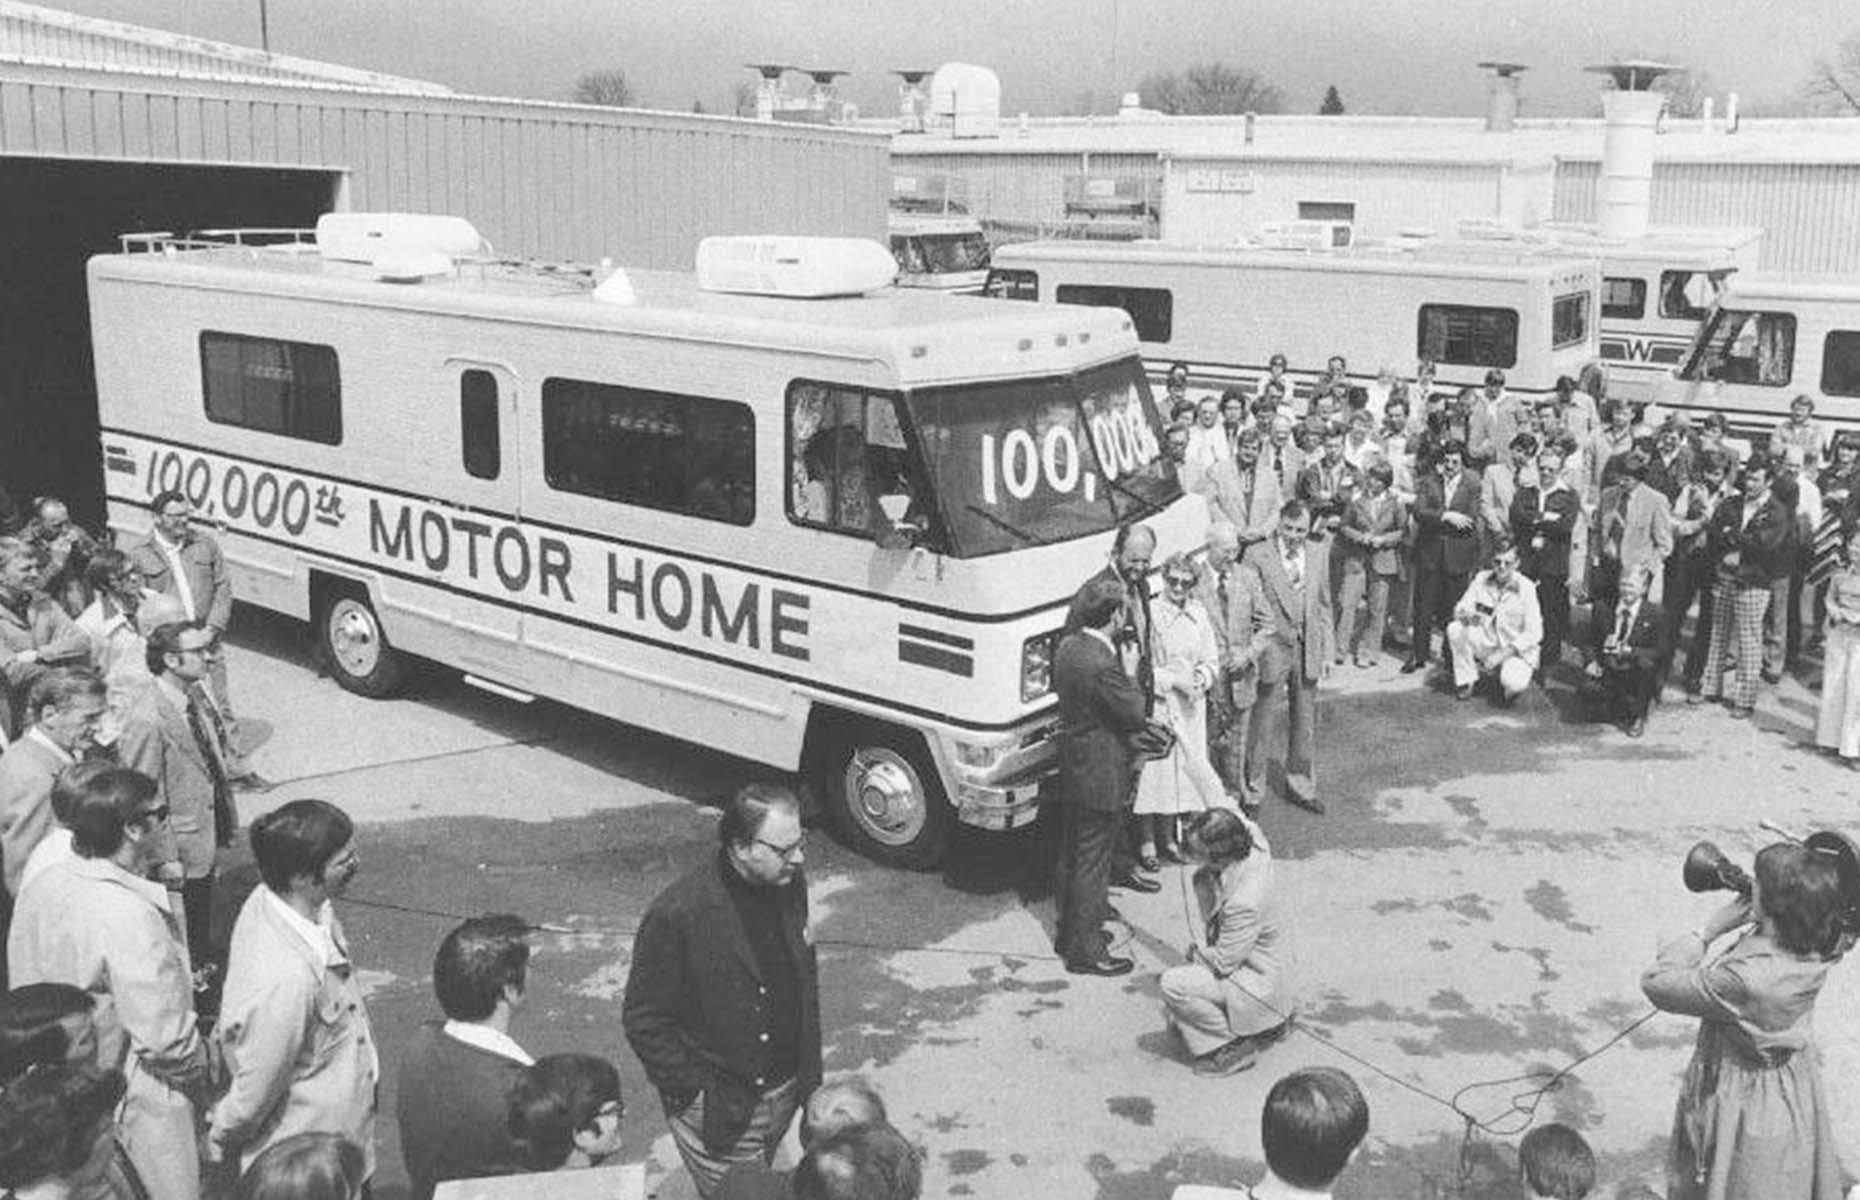 Winnebago remained a titan of the RV industry through the 1970s. In this decade, the company celebrated the sale of its 100,000th motorhome, showing that the RV had well and truly entered the mainstream. Winnebago celebrate the milestone in this 1977 photograph.